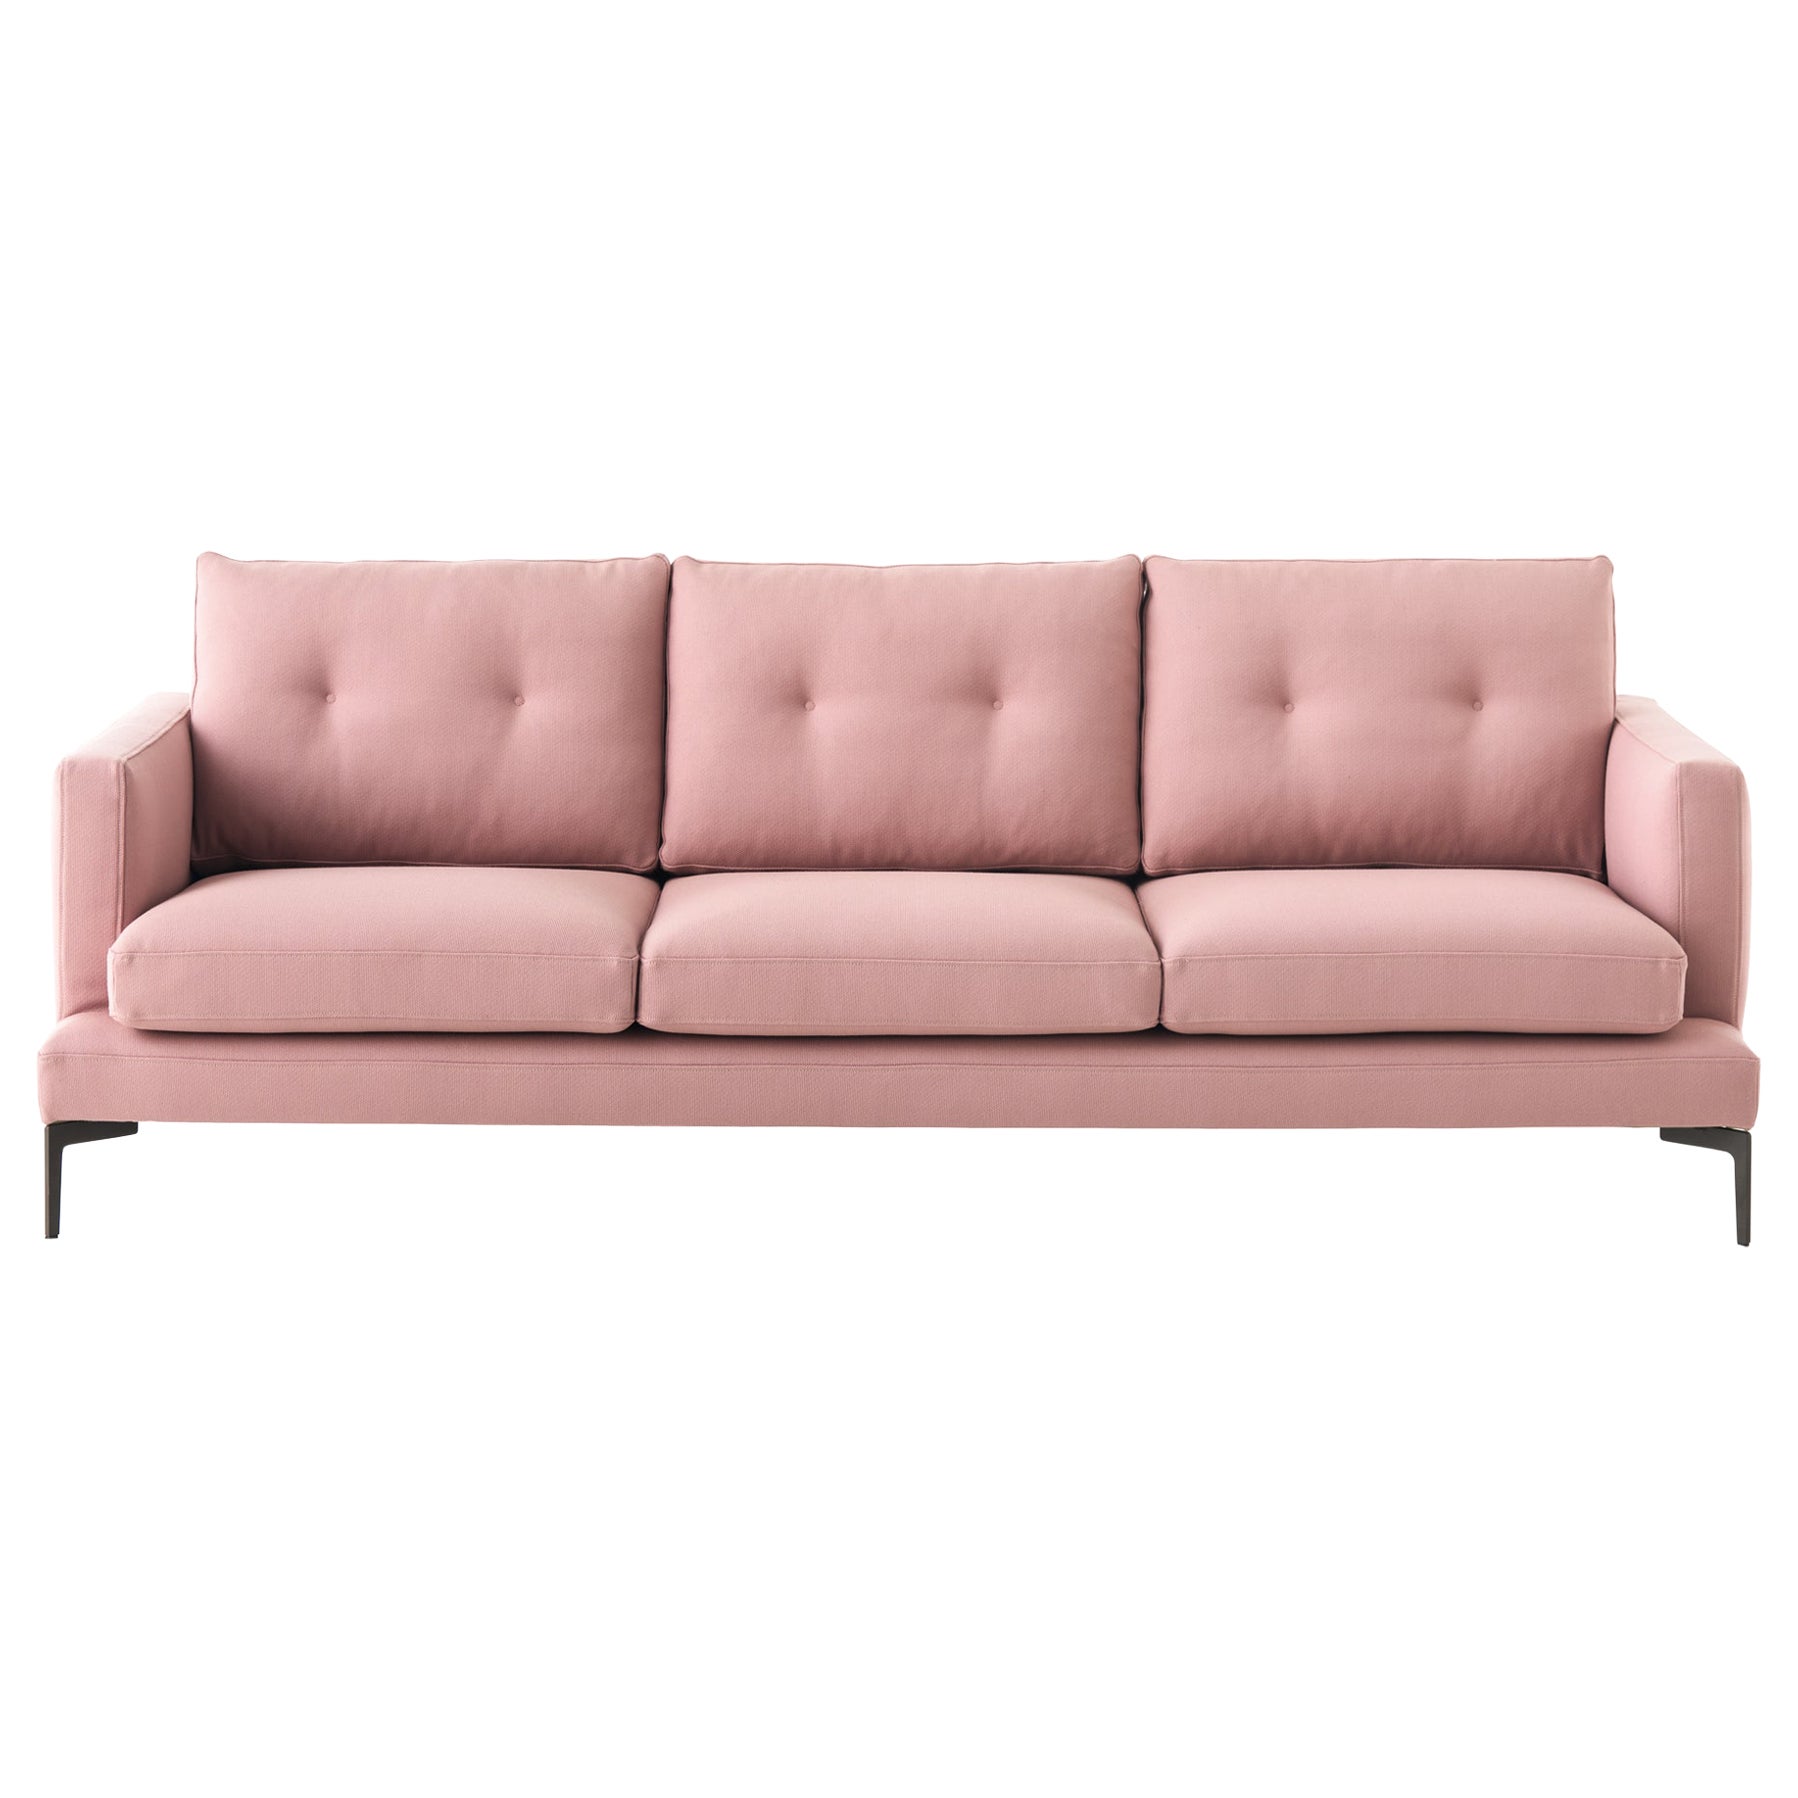 Essentiel 3-Seat 220 Sofa in Braided Pink Upholstery & Grey Legs, Sergio Bicego For Sale